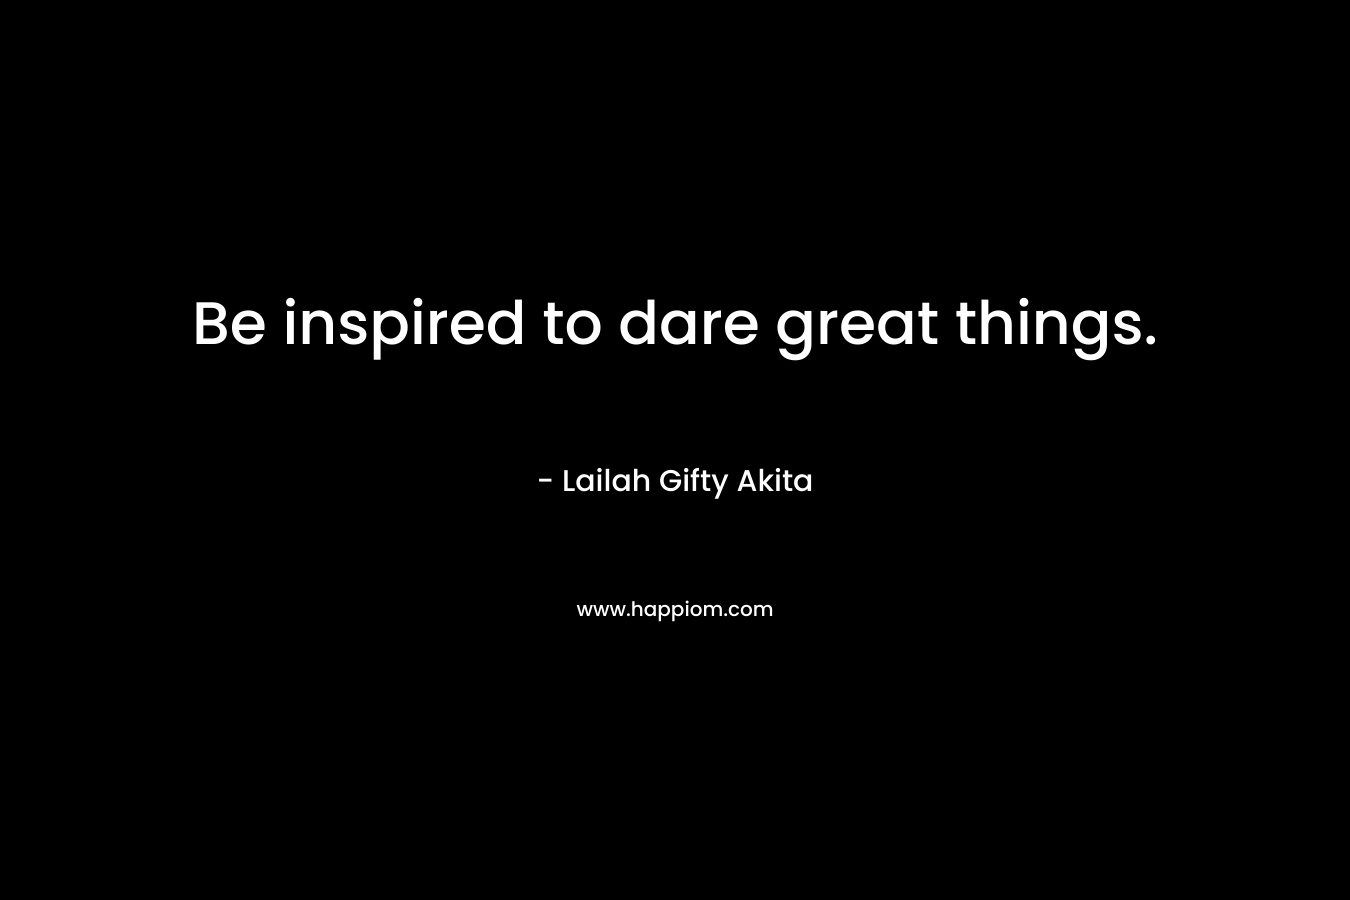 Be inspired to dare great things. – Lailah Gifty Akita